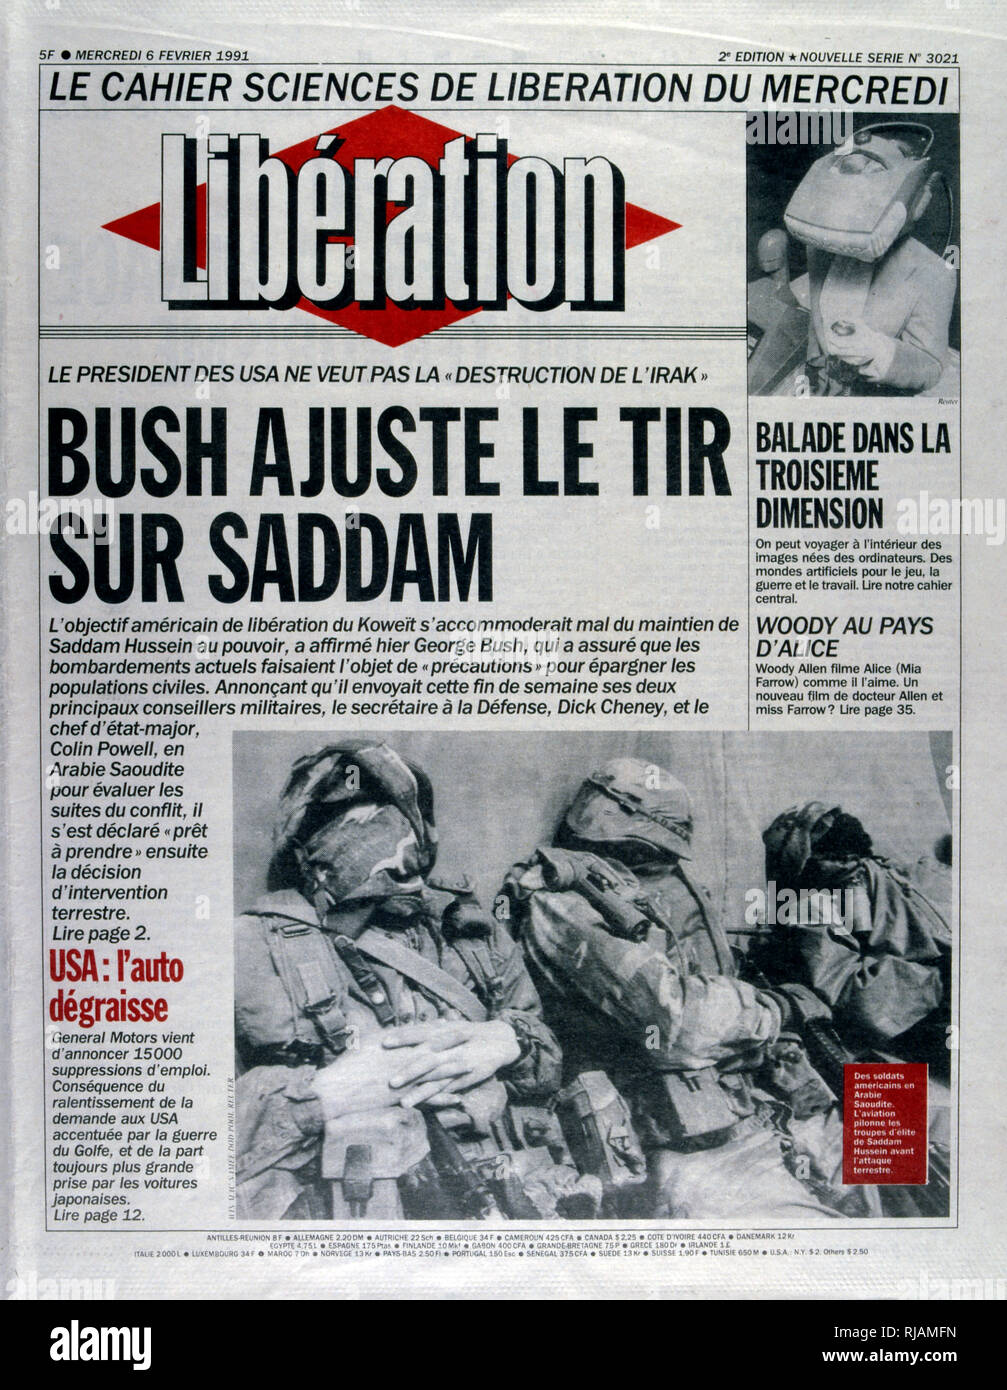 Front Page of the French Communist publication 'Liberation' reporting that President Bush targets Saddam Hussein in the Gulf War, 6th February 1991.  The Gulf War (2 August 1990 - 28 February 1991), codenamed Operation Desert Shield and Operation Desert Storm, was a war waged by coalition forces from 35 nations led by the United States against Iraq in response to Iraq's invasion and annexation of Kuwait. Stock Photo